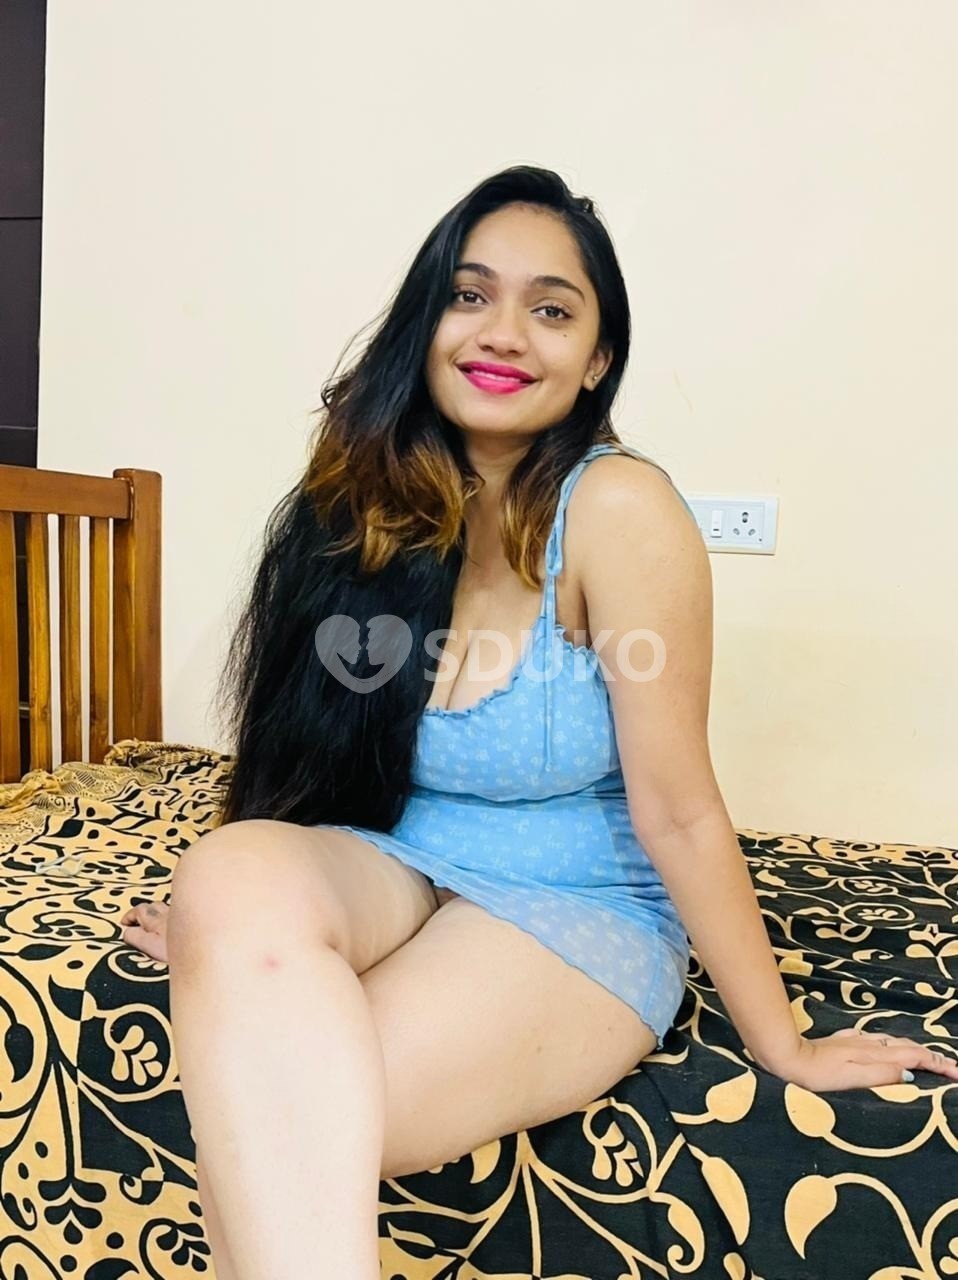 Hoshiarpur in ⭐⭐⭐ my self Divya low price High profile girls available home and hotel sarvice available